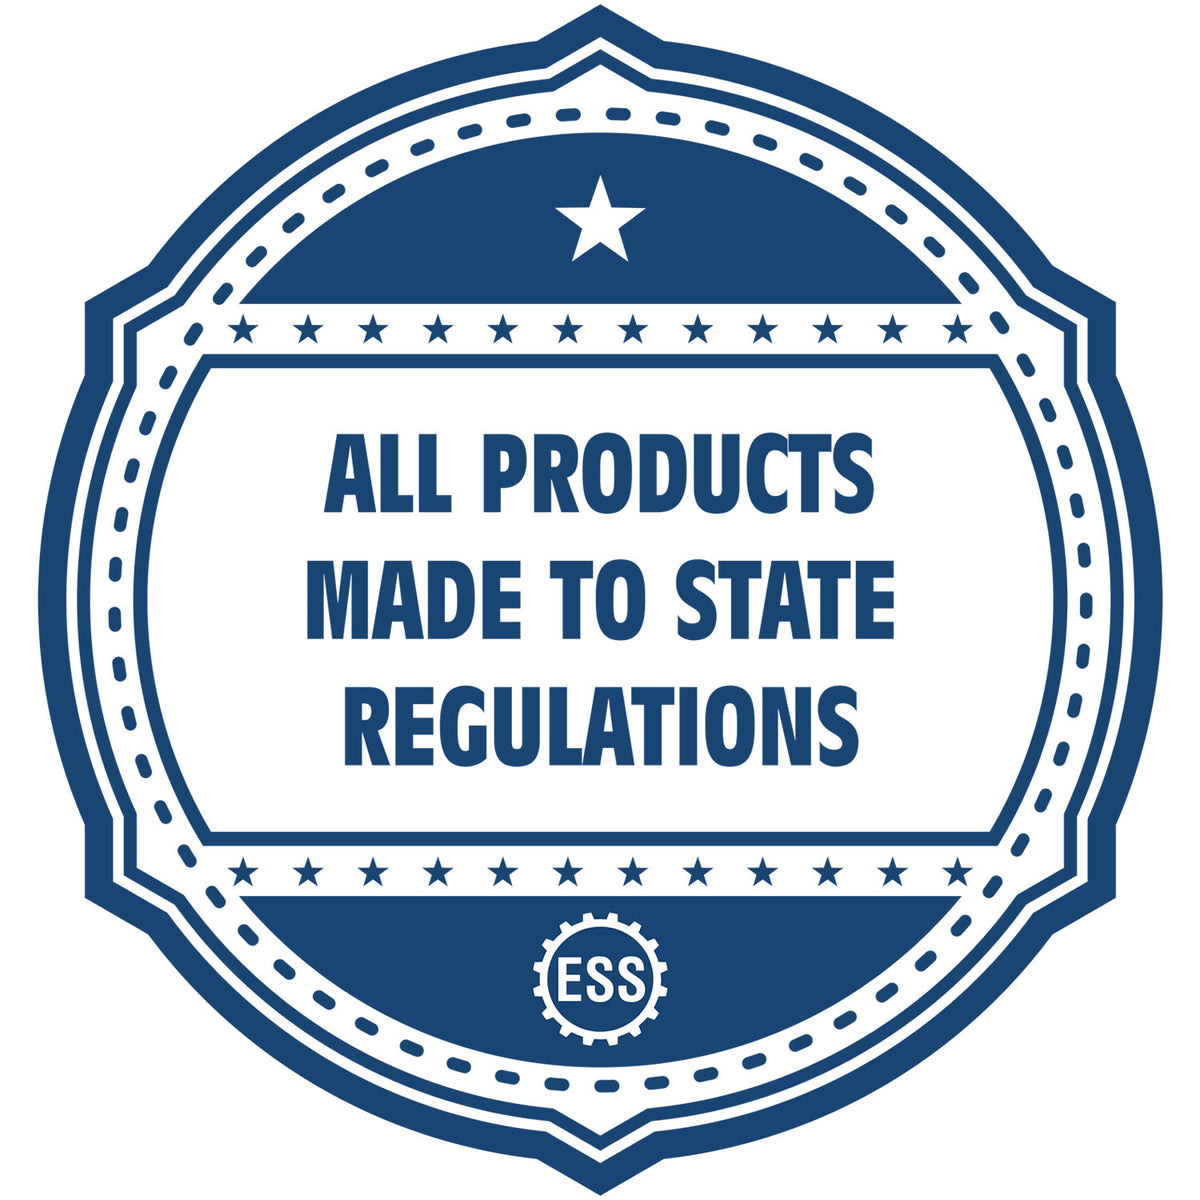 A blue icon or badge for the Soft Tennessee Professional Geologist Seal showing that this product is made in compliance with state regulations.